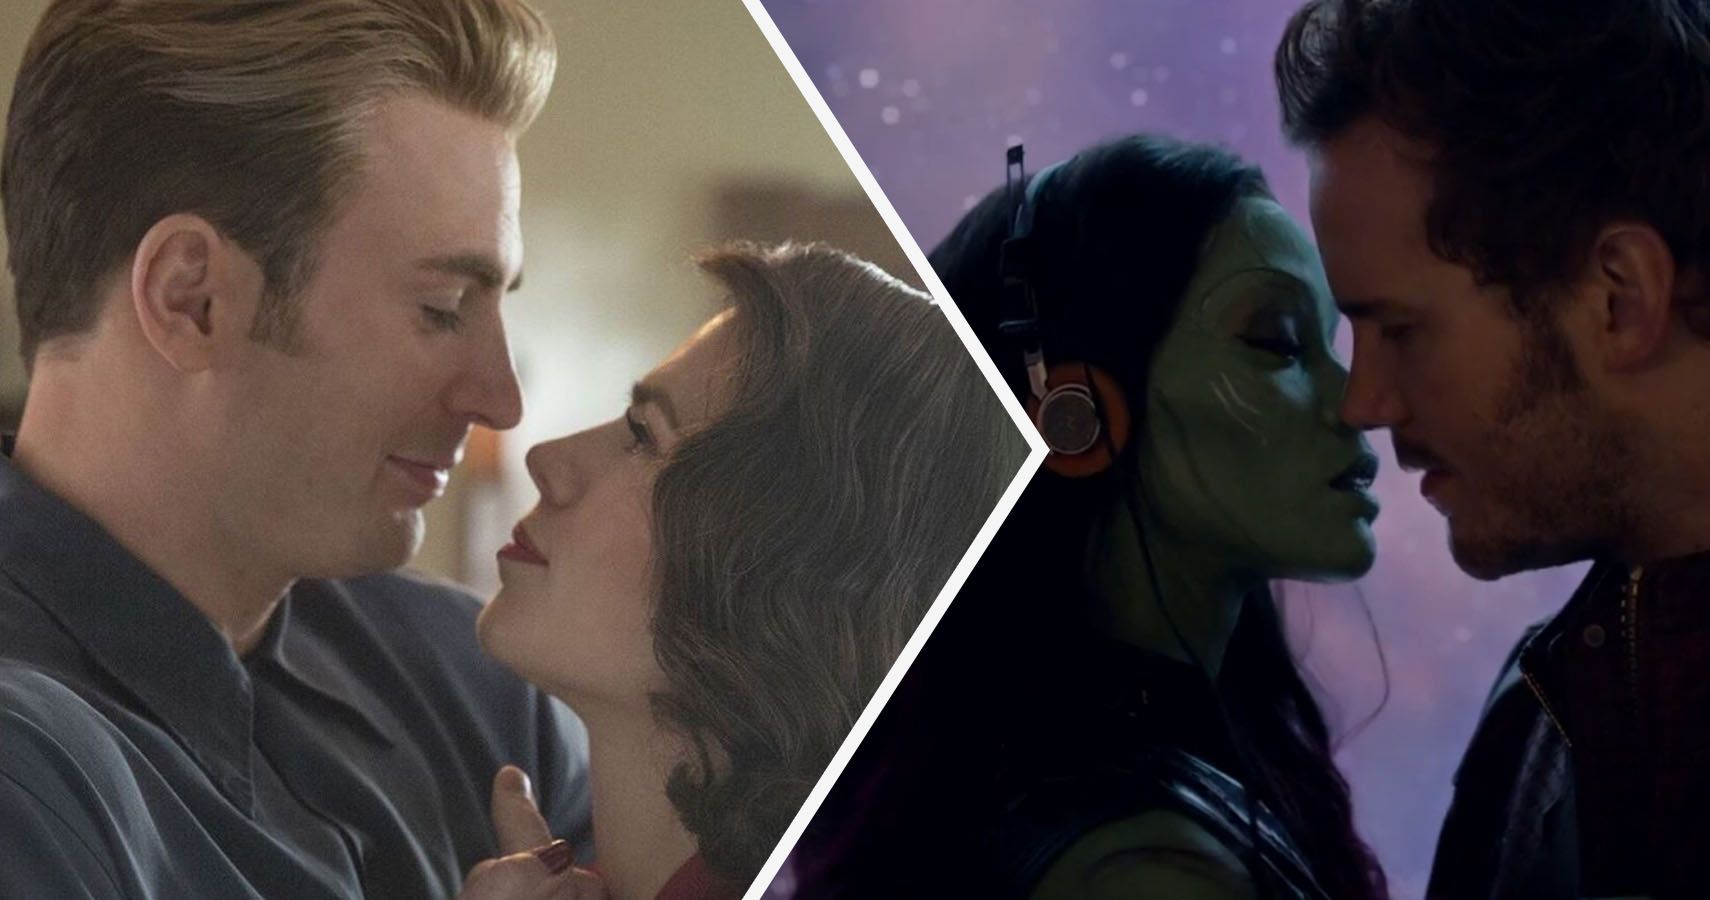 Dragon Age: The 10 Best Romances From The Franchise, Ranked